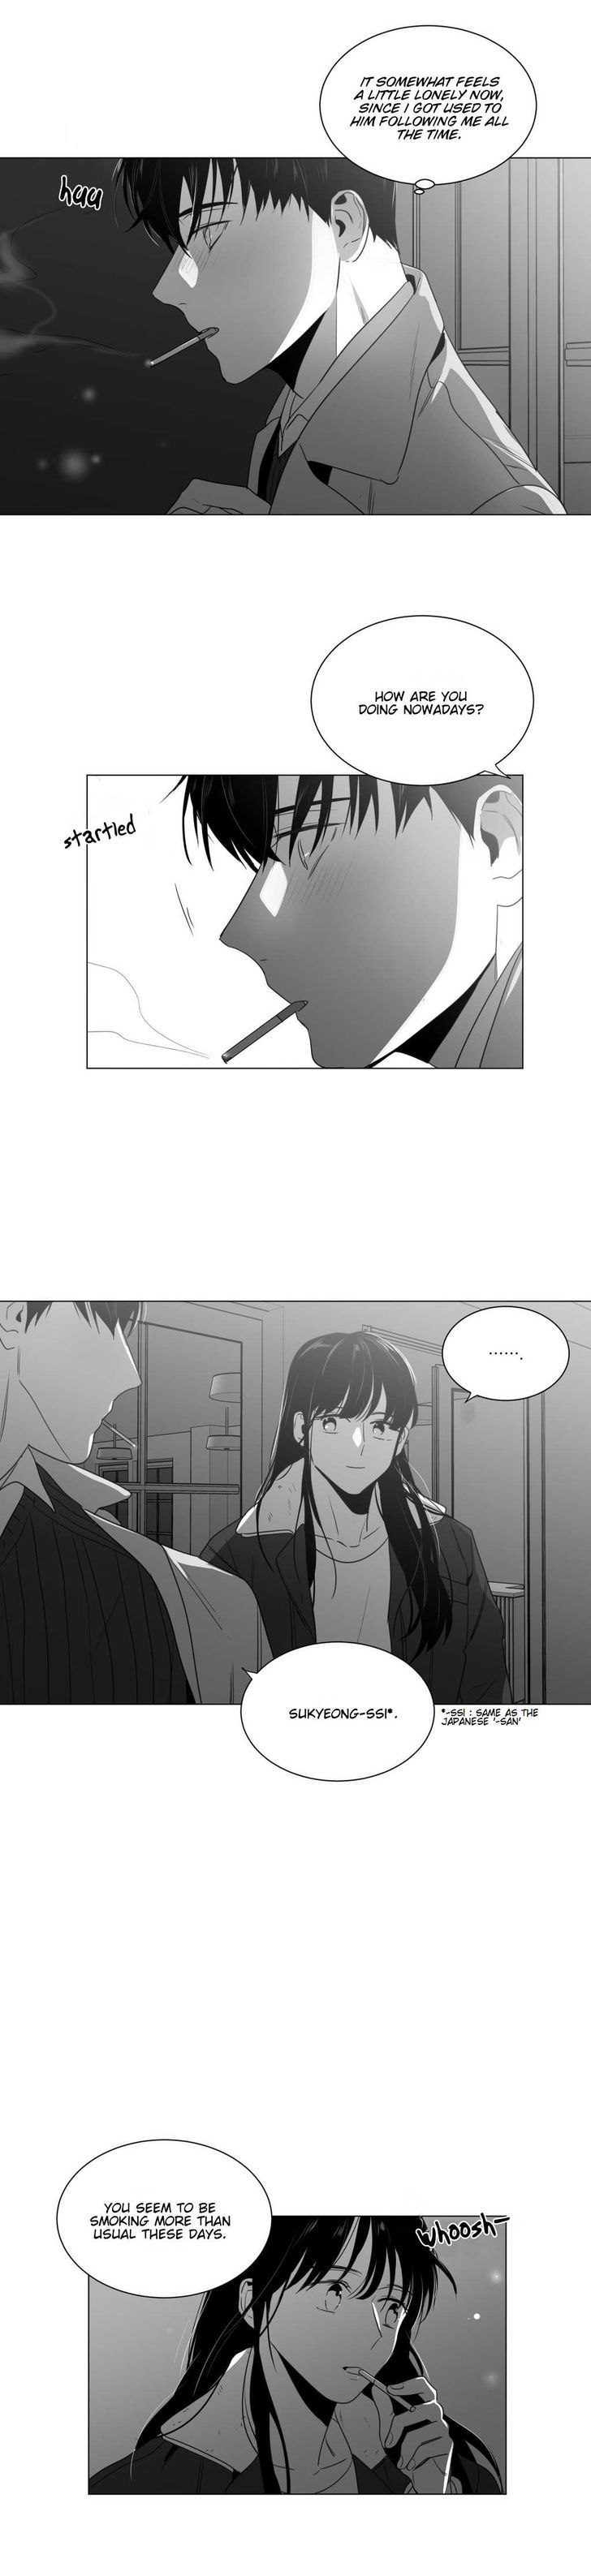 Lover Boy (Lezhin) Chapter 027 page 9